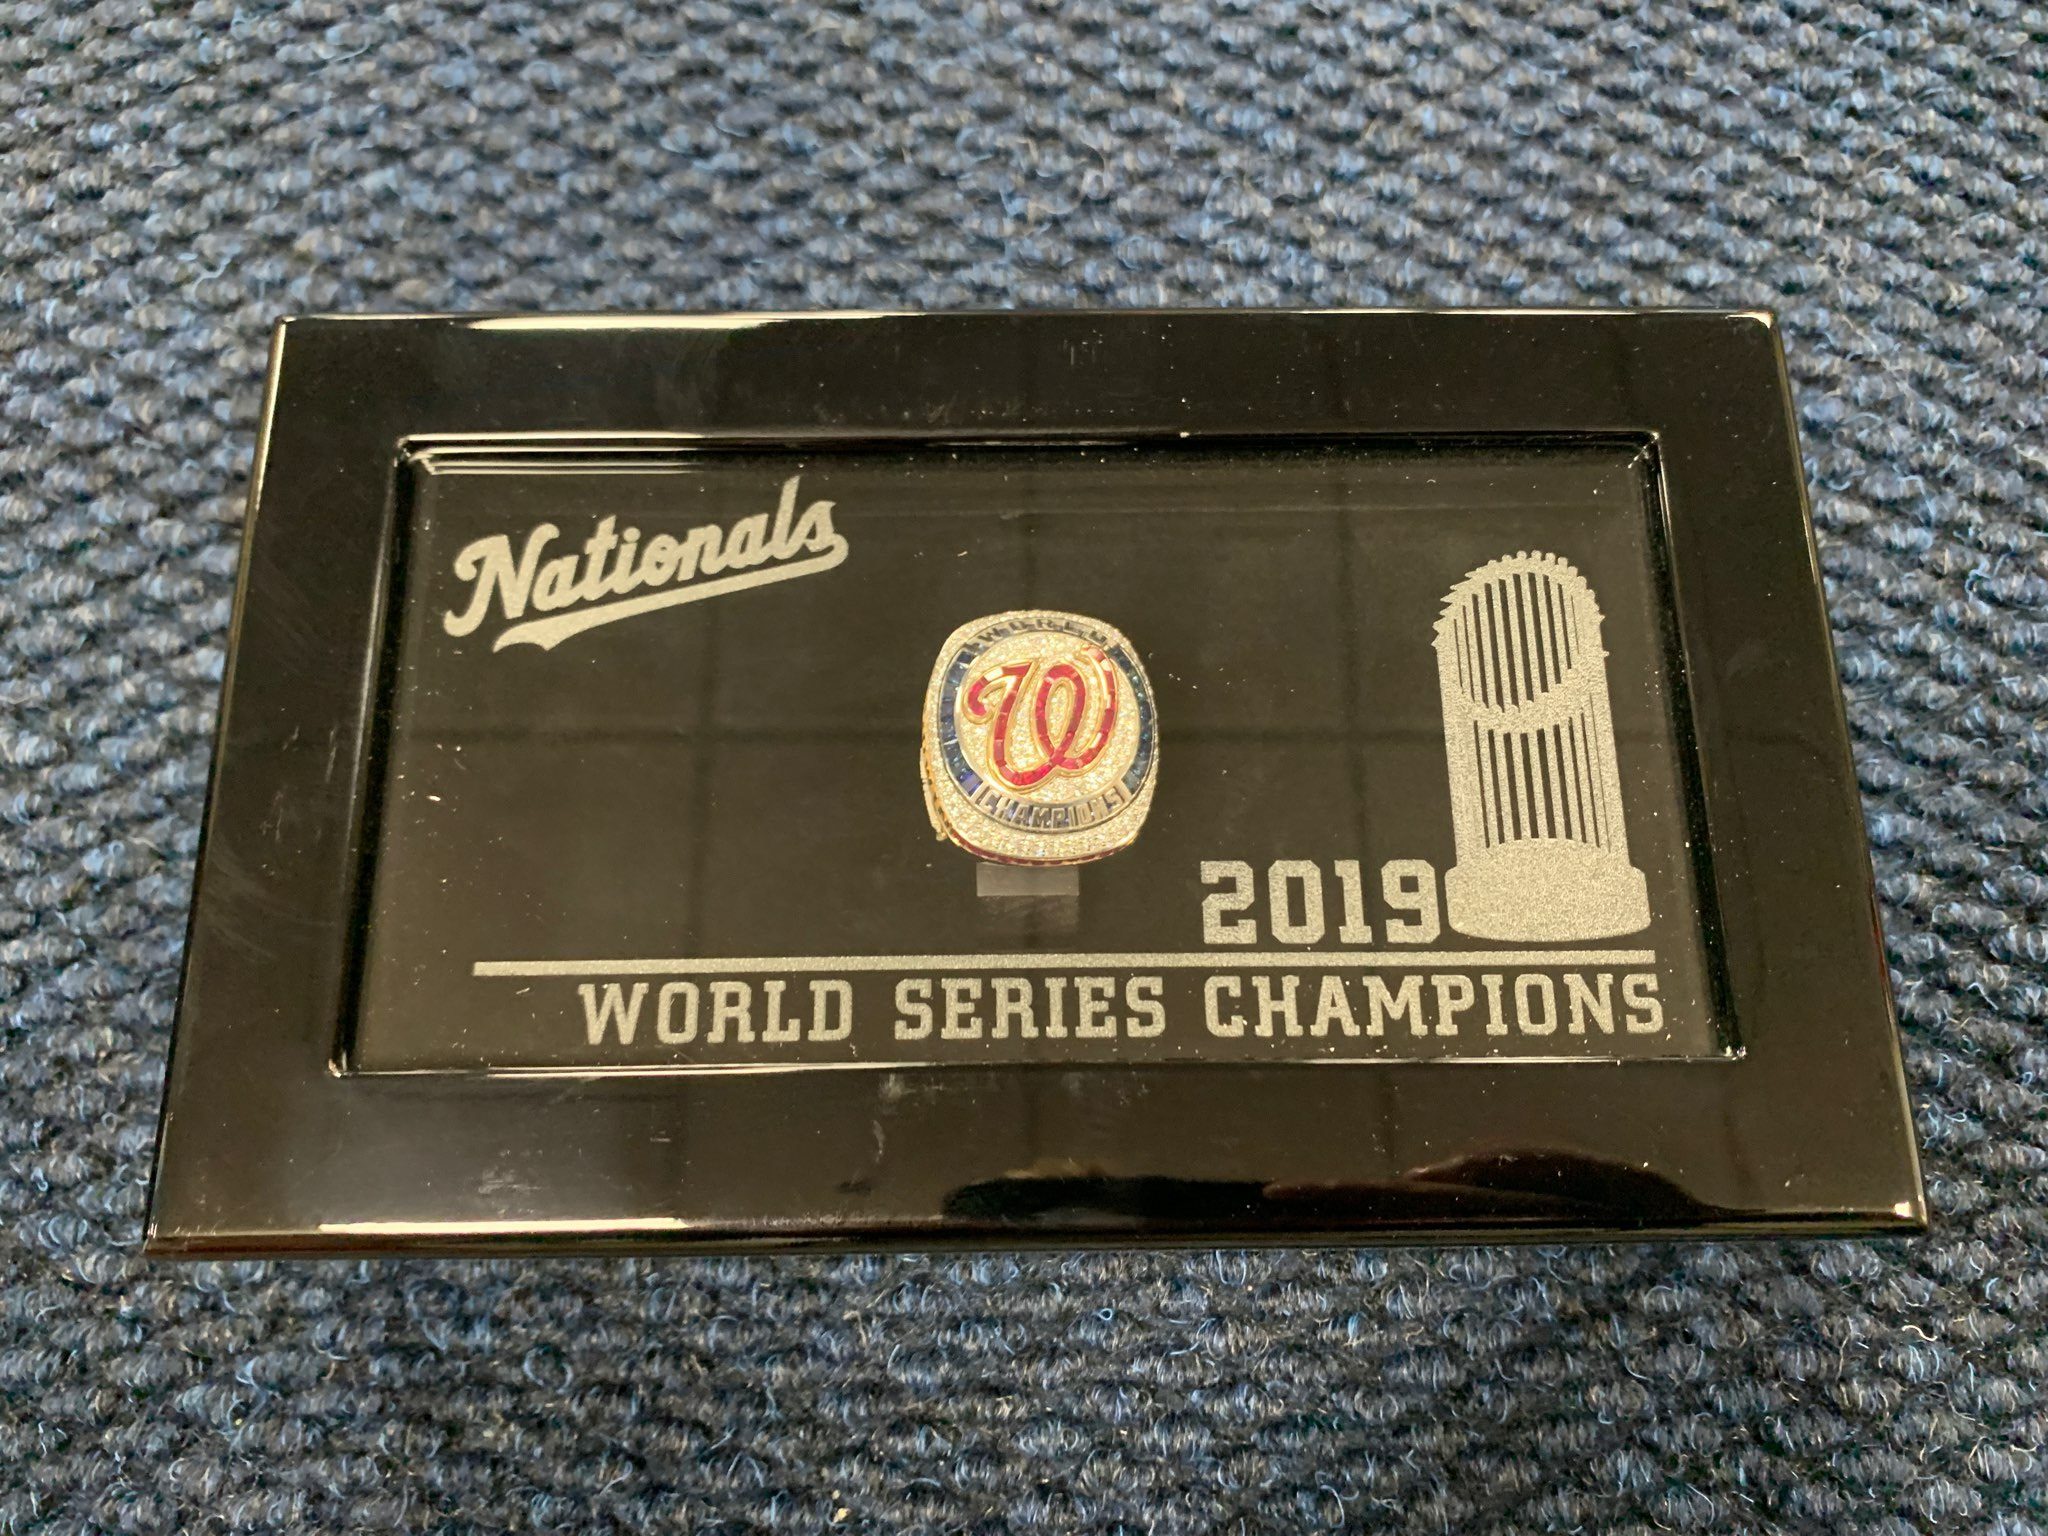 Kyle McGowin's World Series ring in its box.